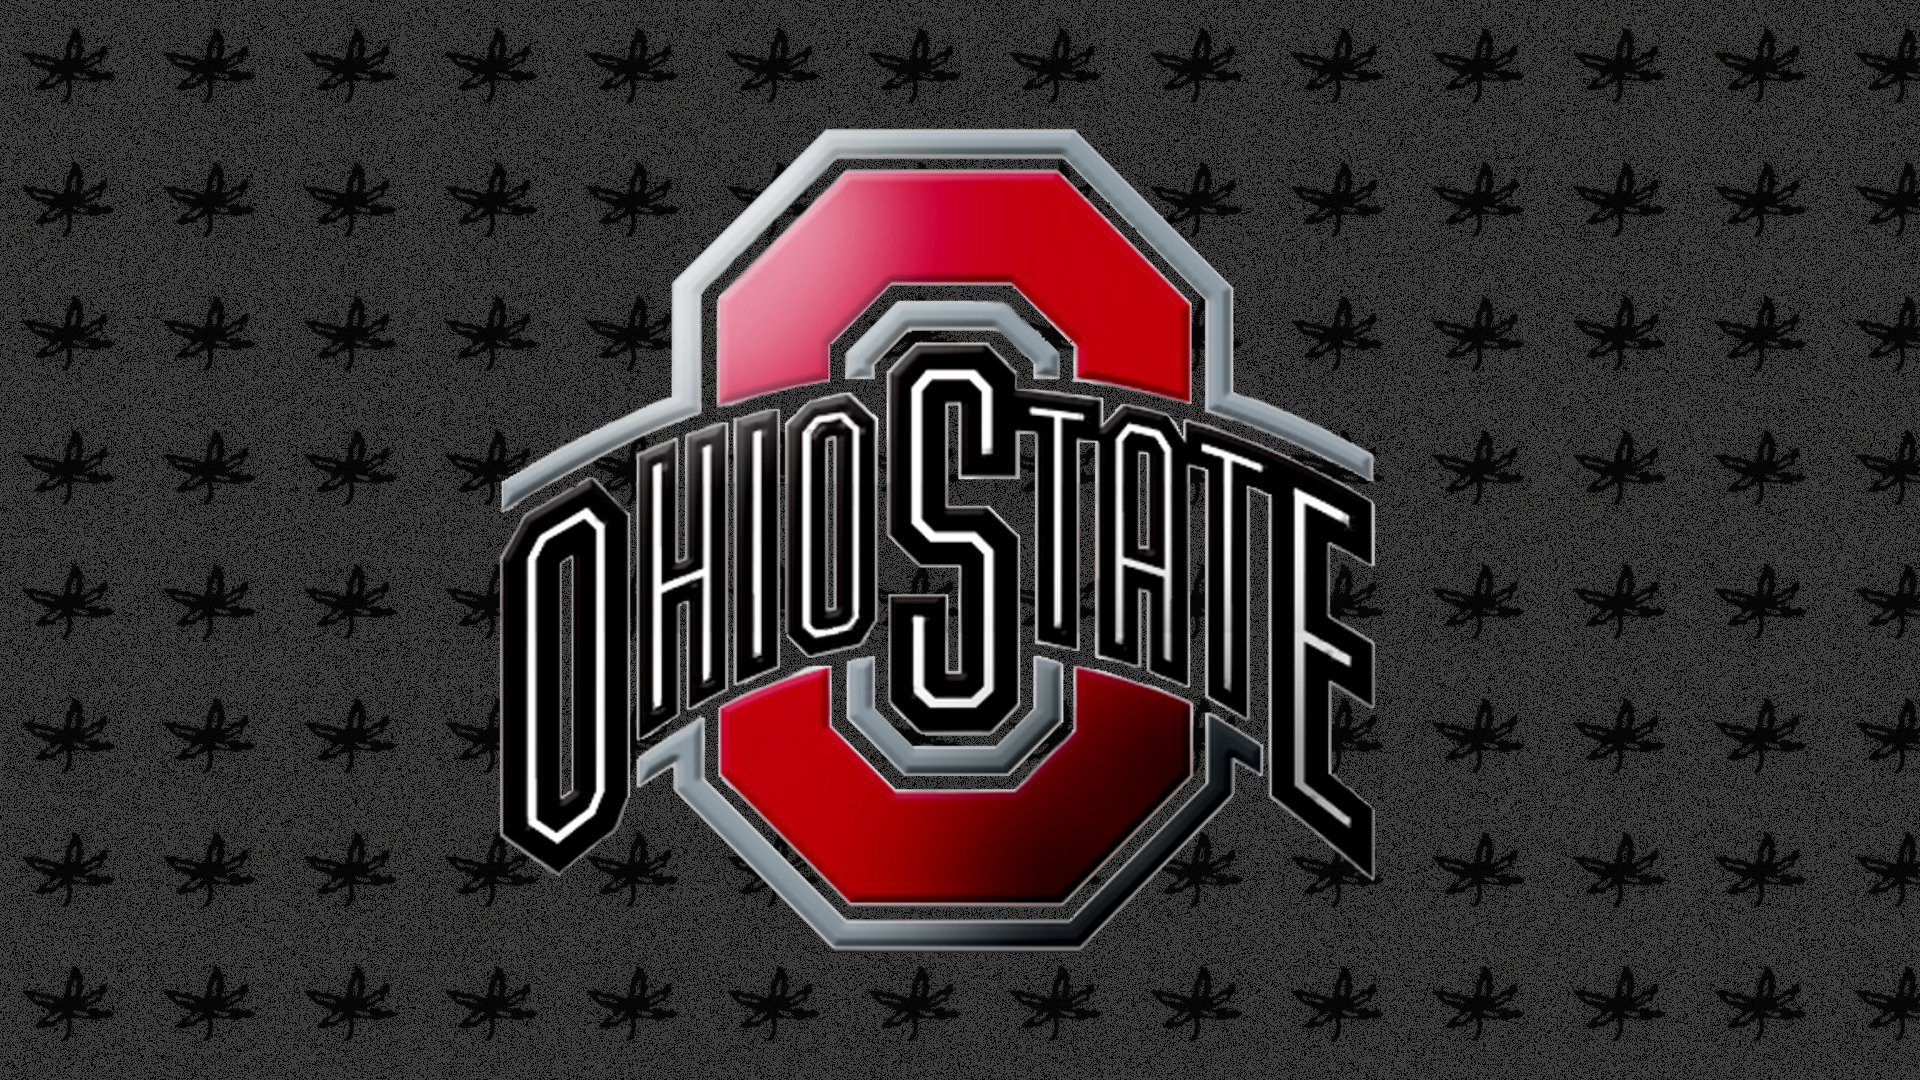 Ohio State Buckeyes Football Backgrounds Download Wallpapers